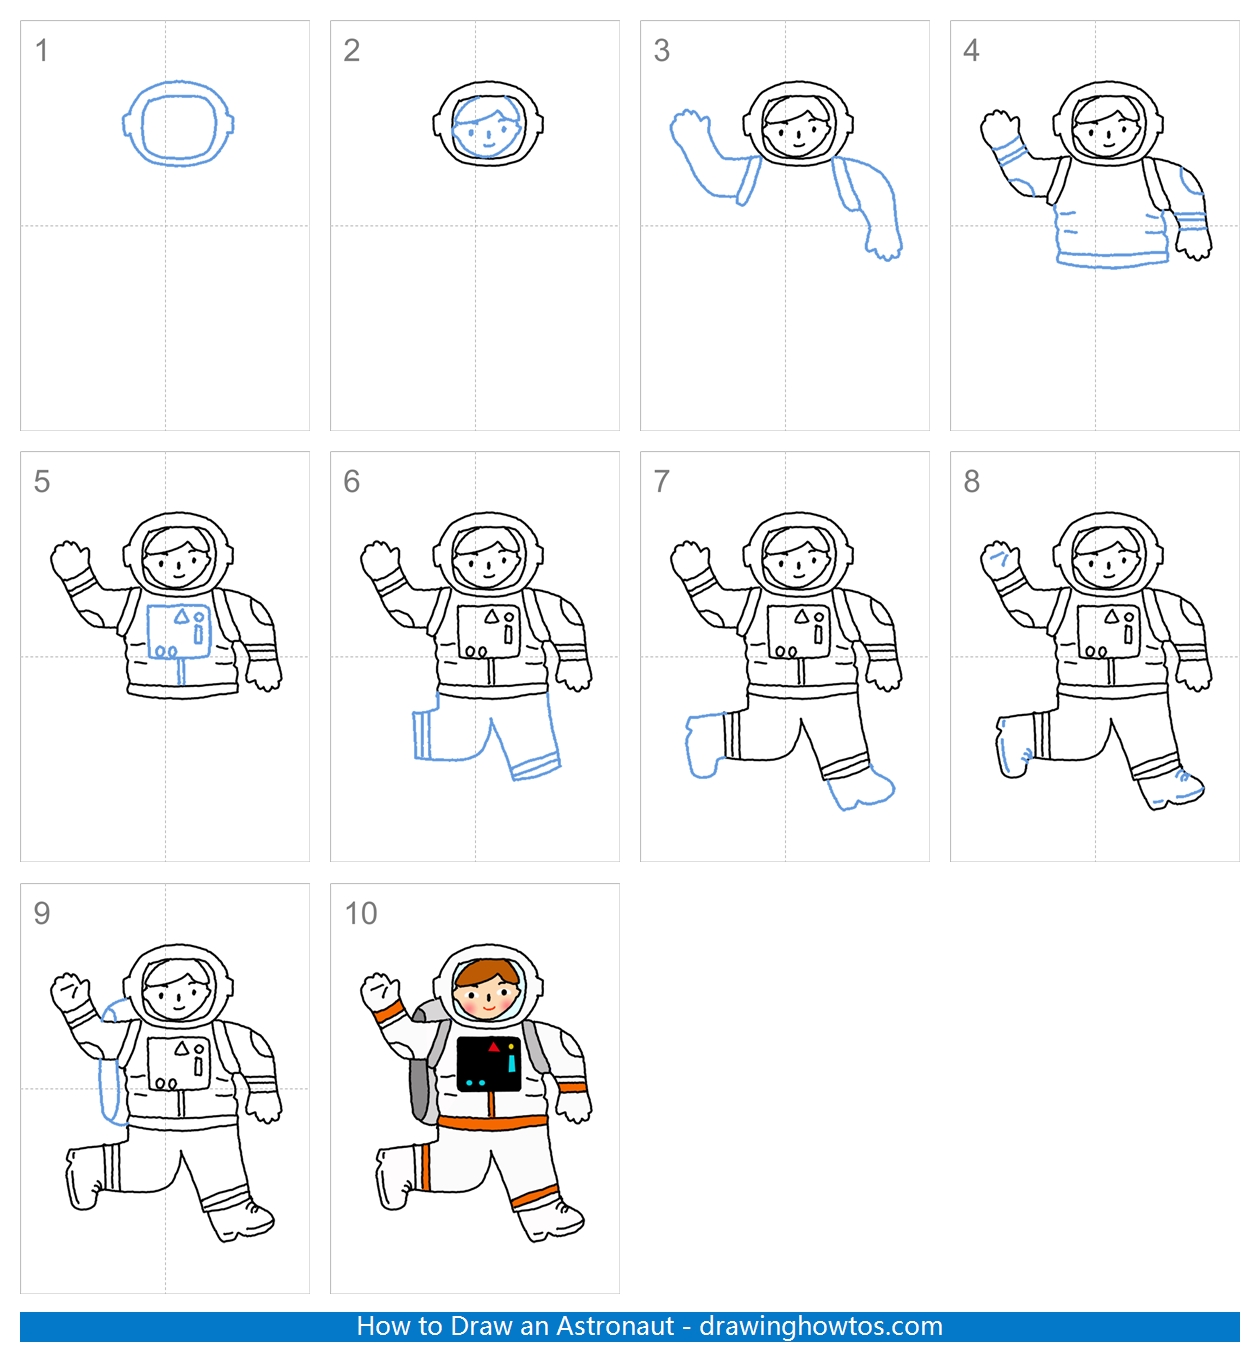 How to Draw an Astronaut Step by Step